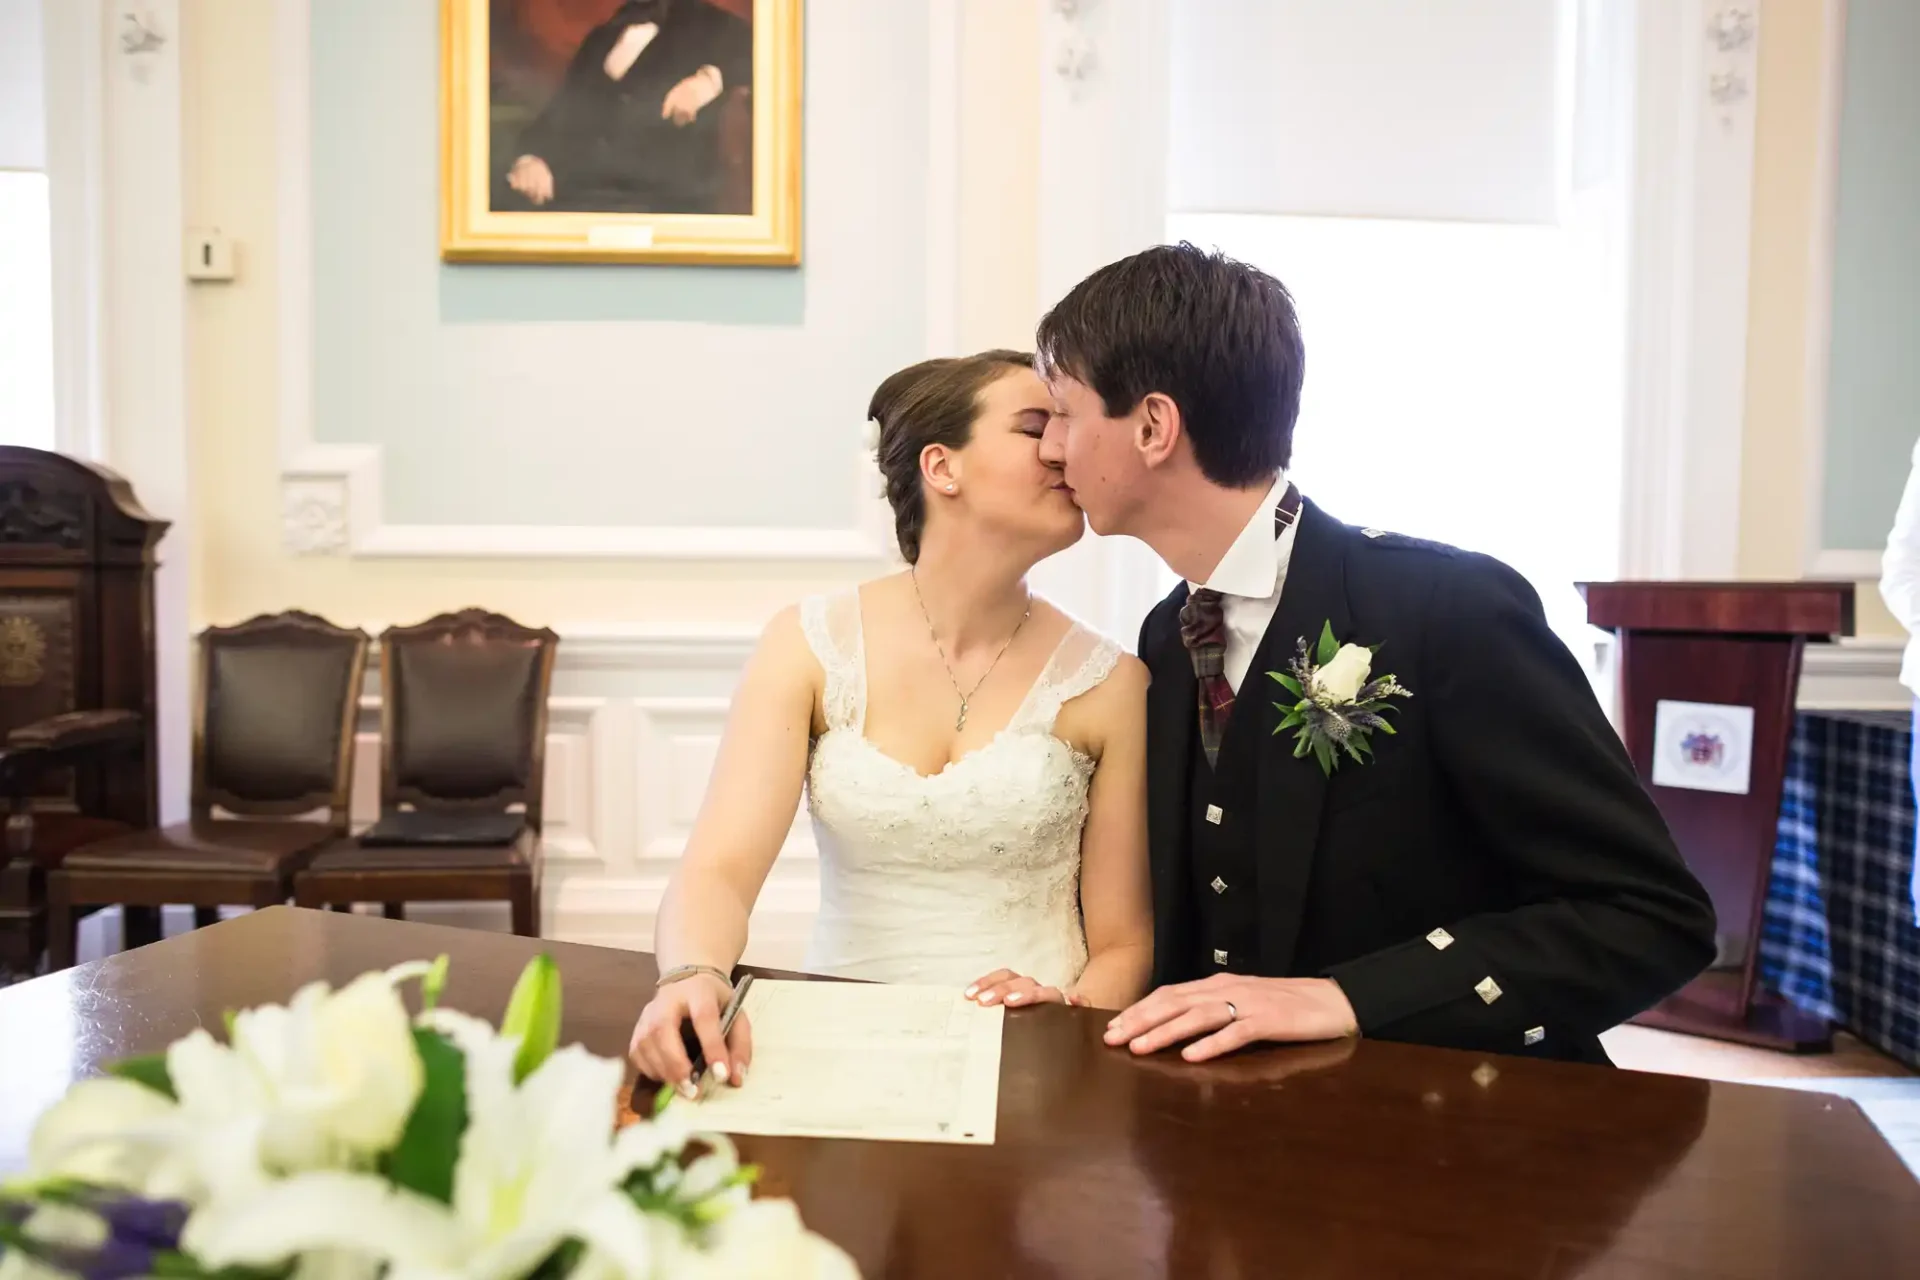 A newlywed couple kissing while signing their marriage certificate at a table, with a floral bouquet in the foreground and elegant room decor.